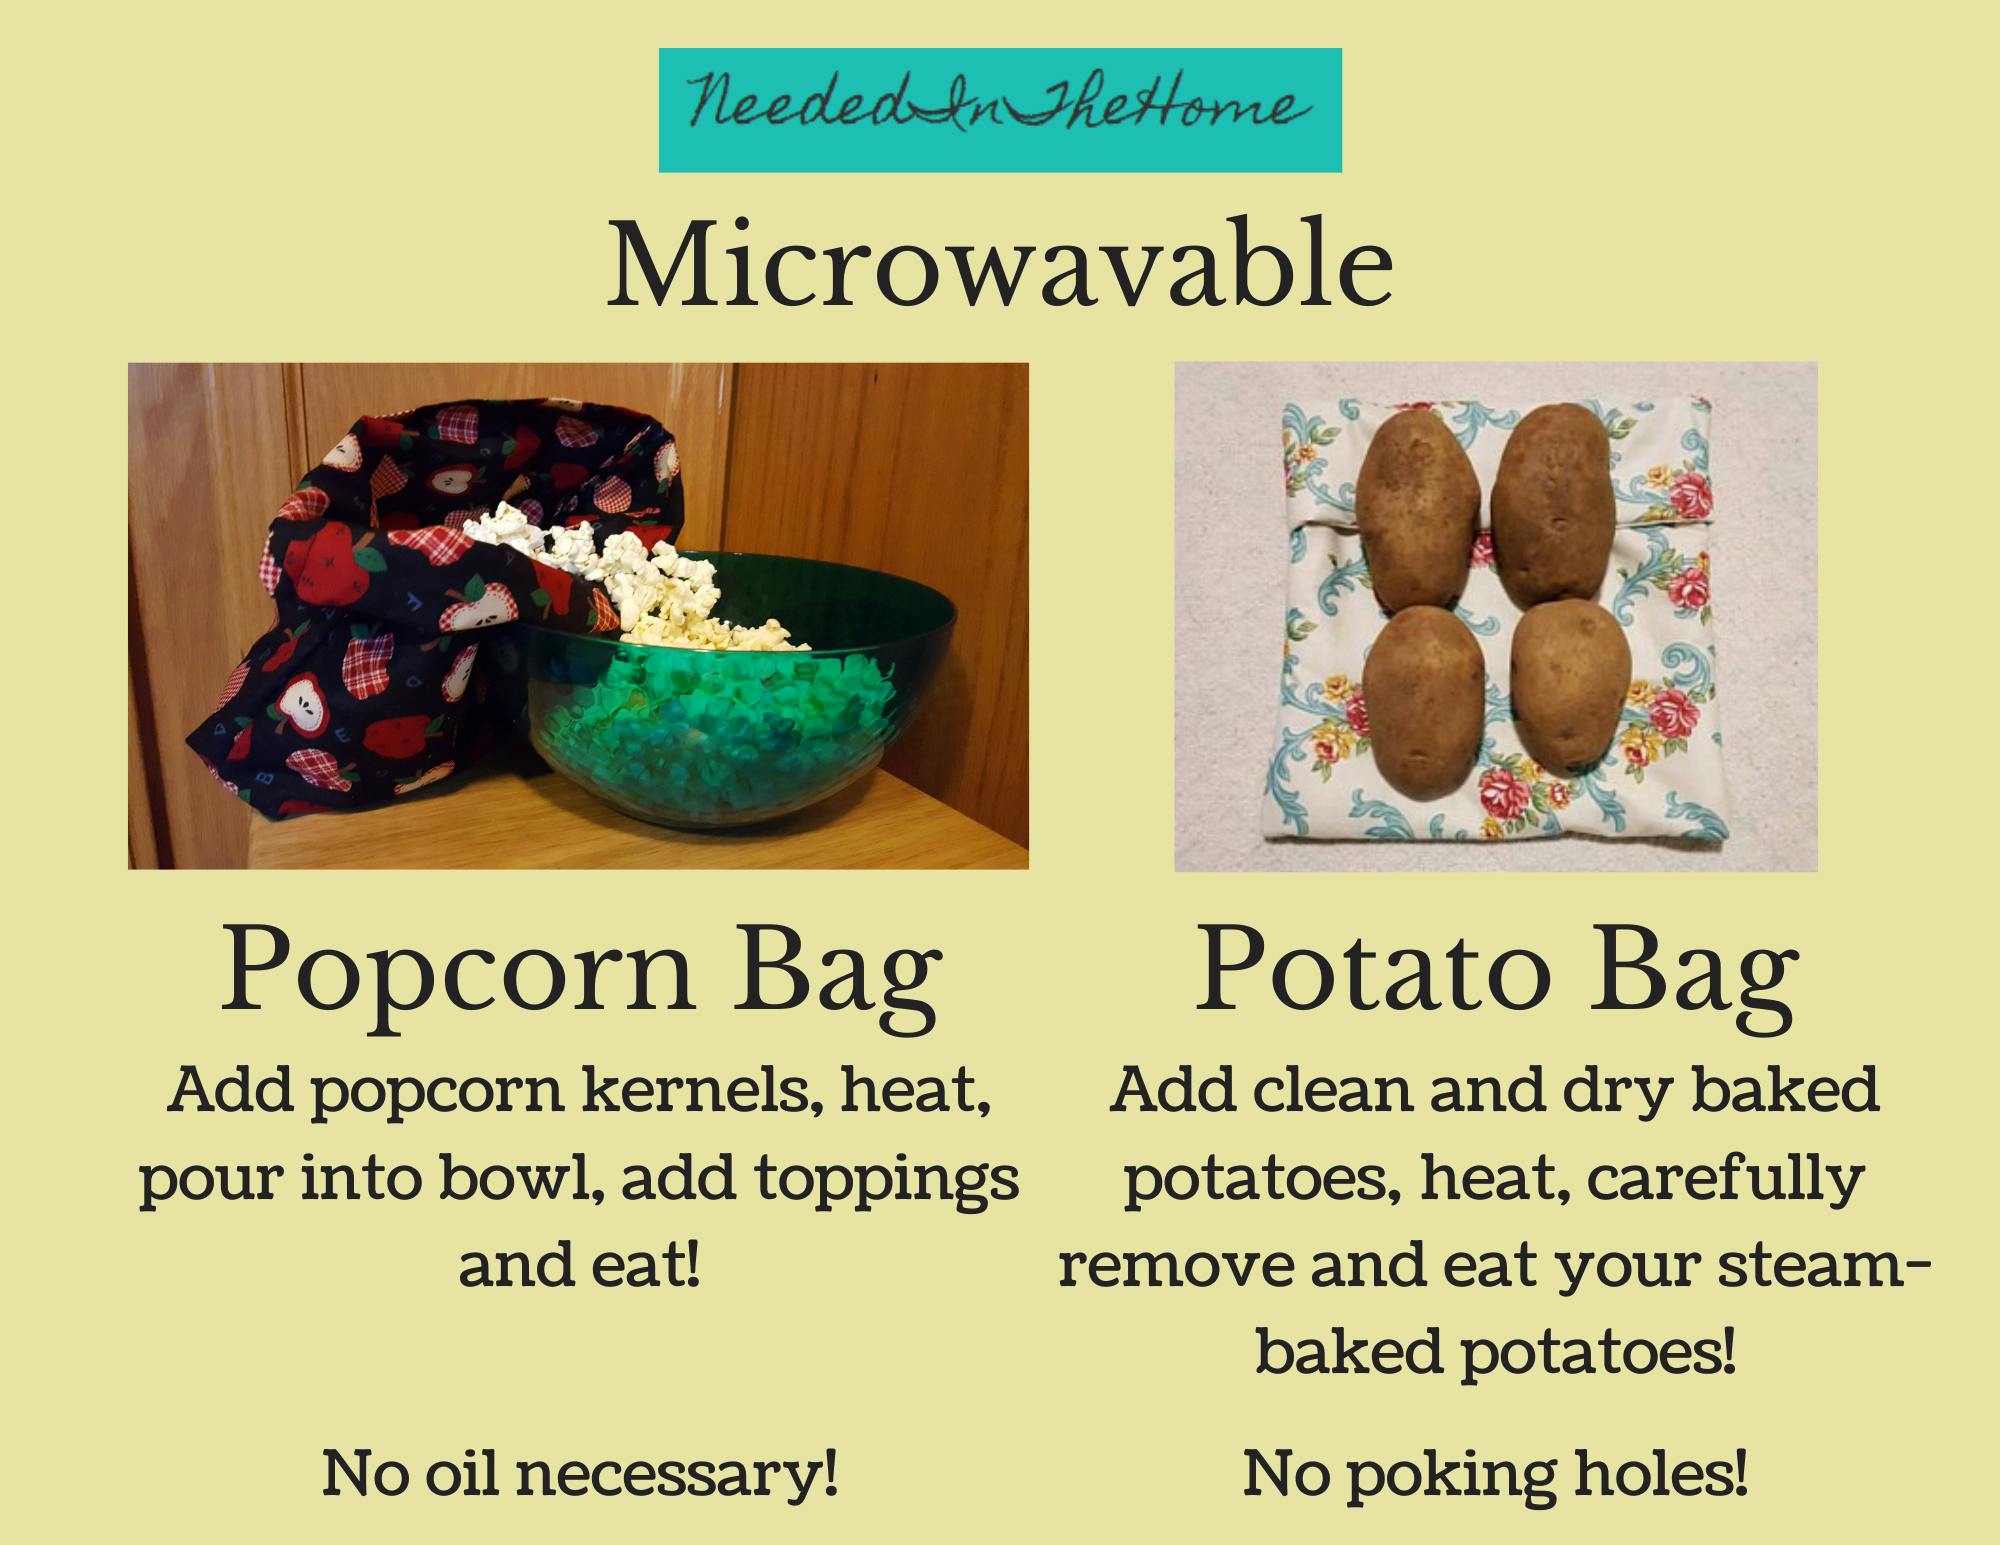 microwavable popcorn bag and potato bag examples of products from NeededInTheHome on Etsy